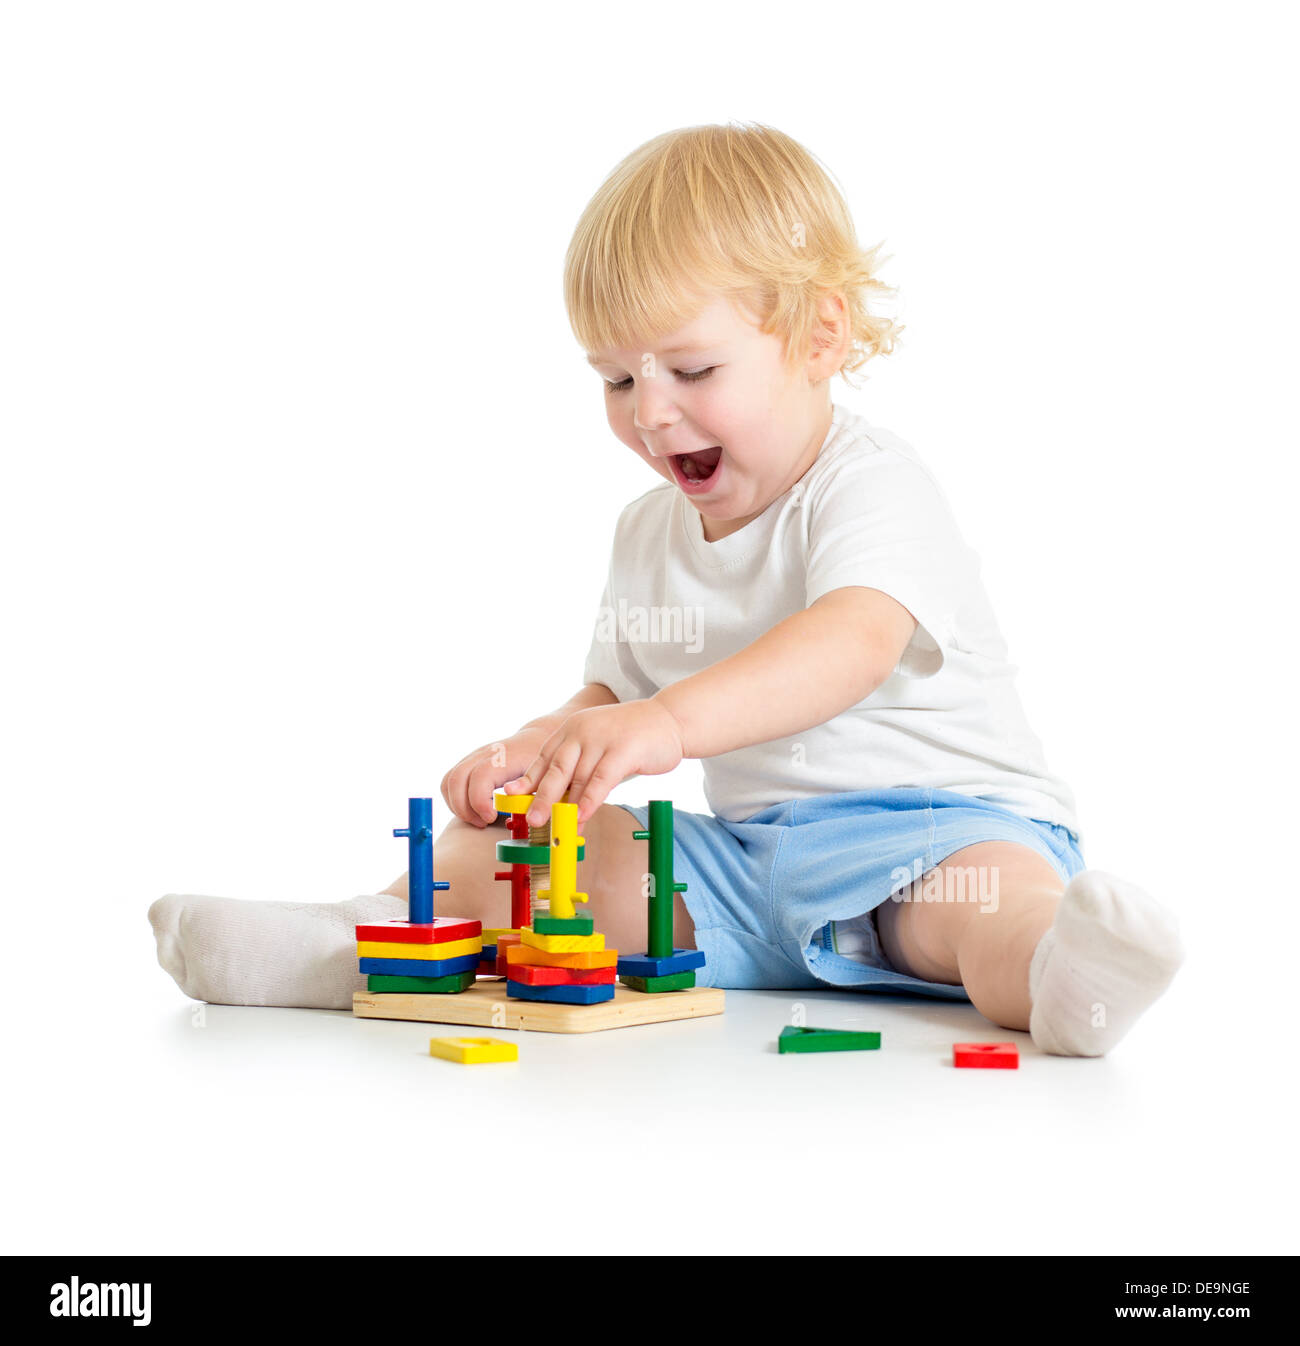 Kid playing logical education toys with great interest Stock Photo